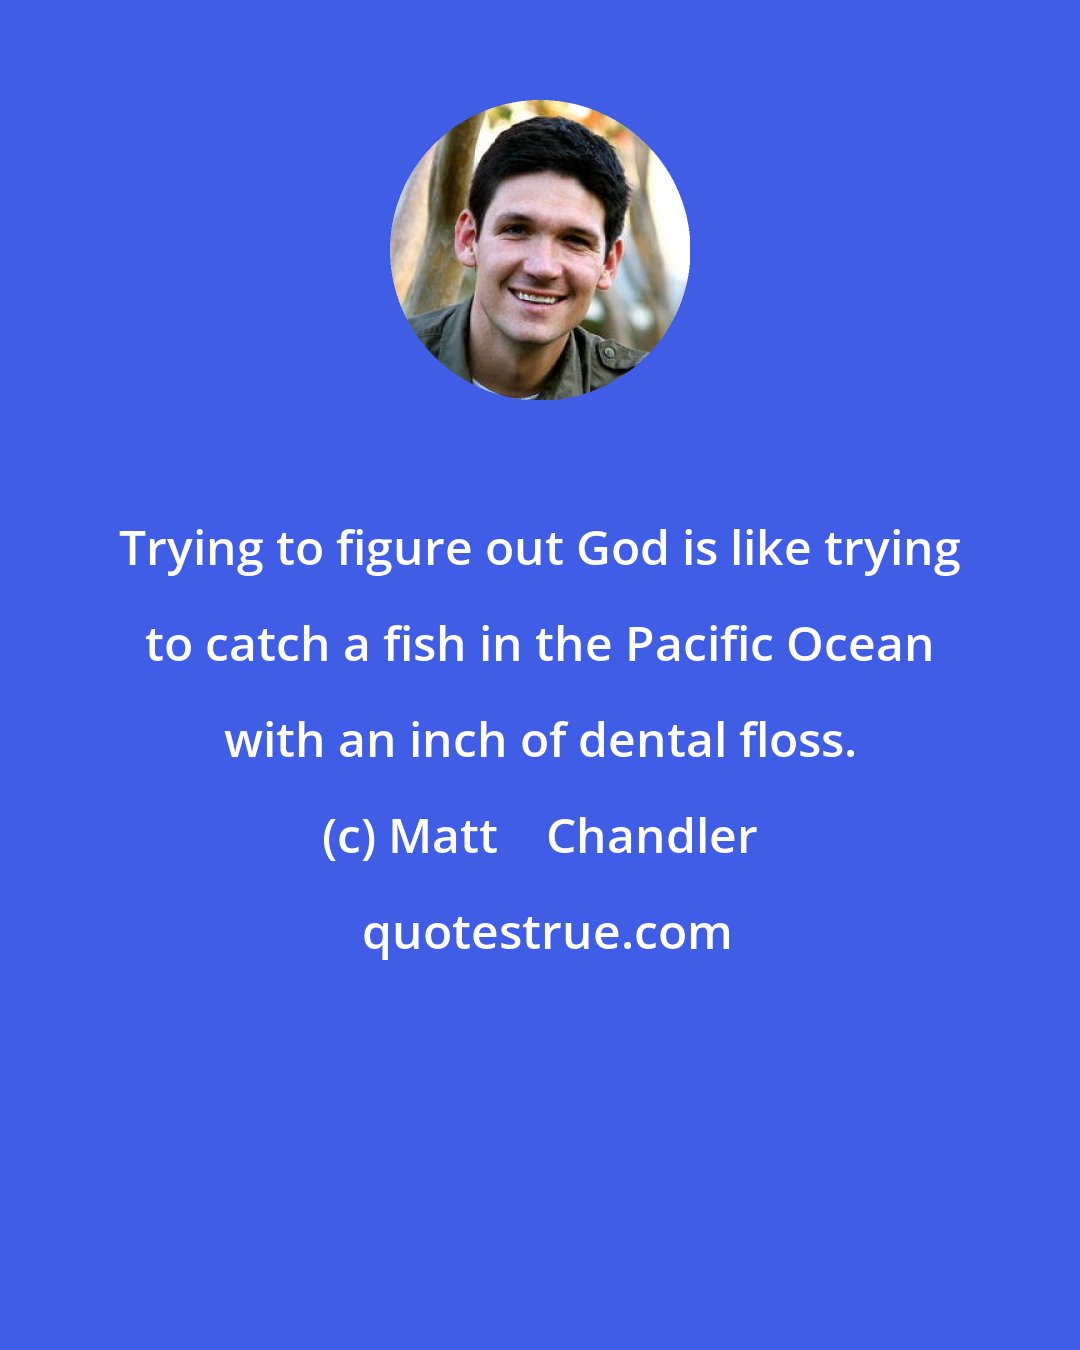 Matt    Chandler: Trying to figure out God is like trying to catch a fish in the Pacific Ocean with an inch of dental floss.